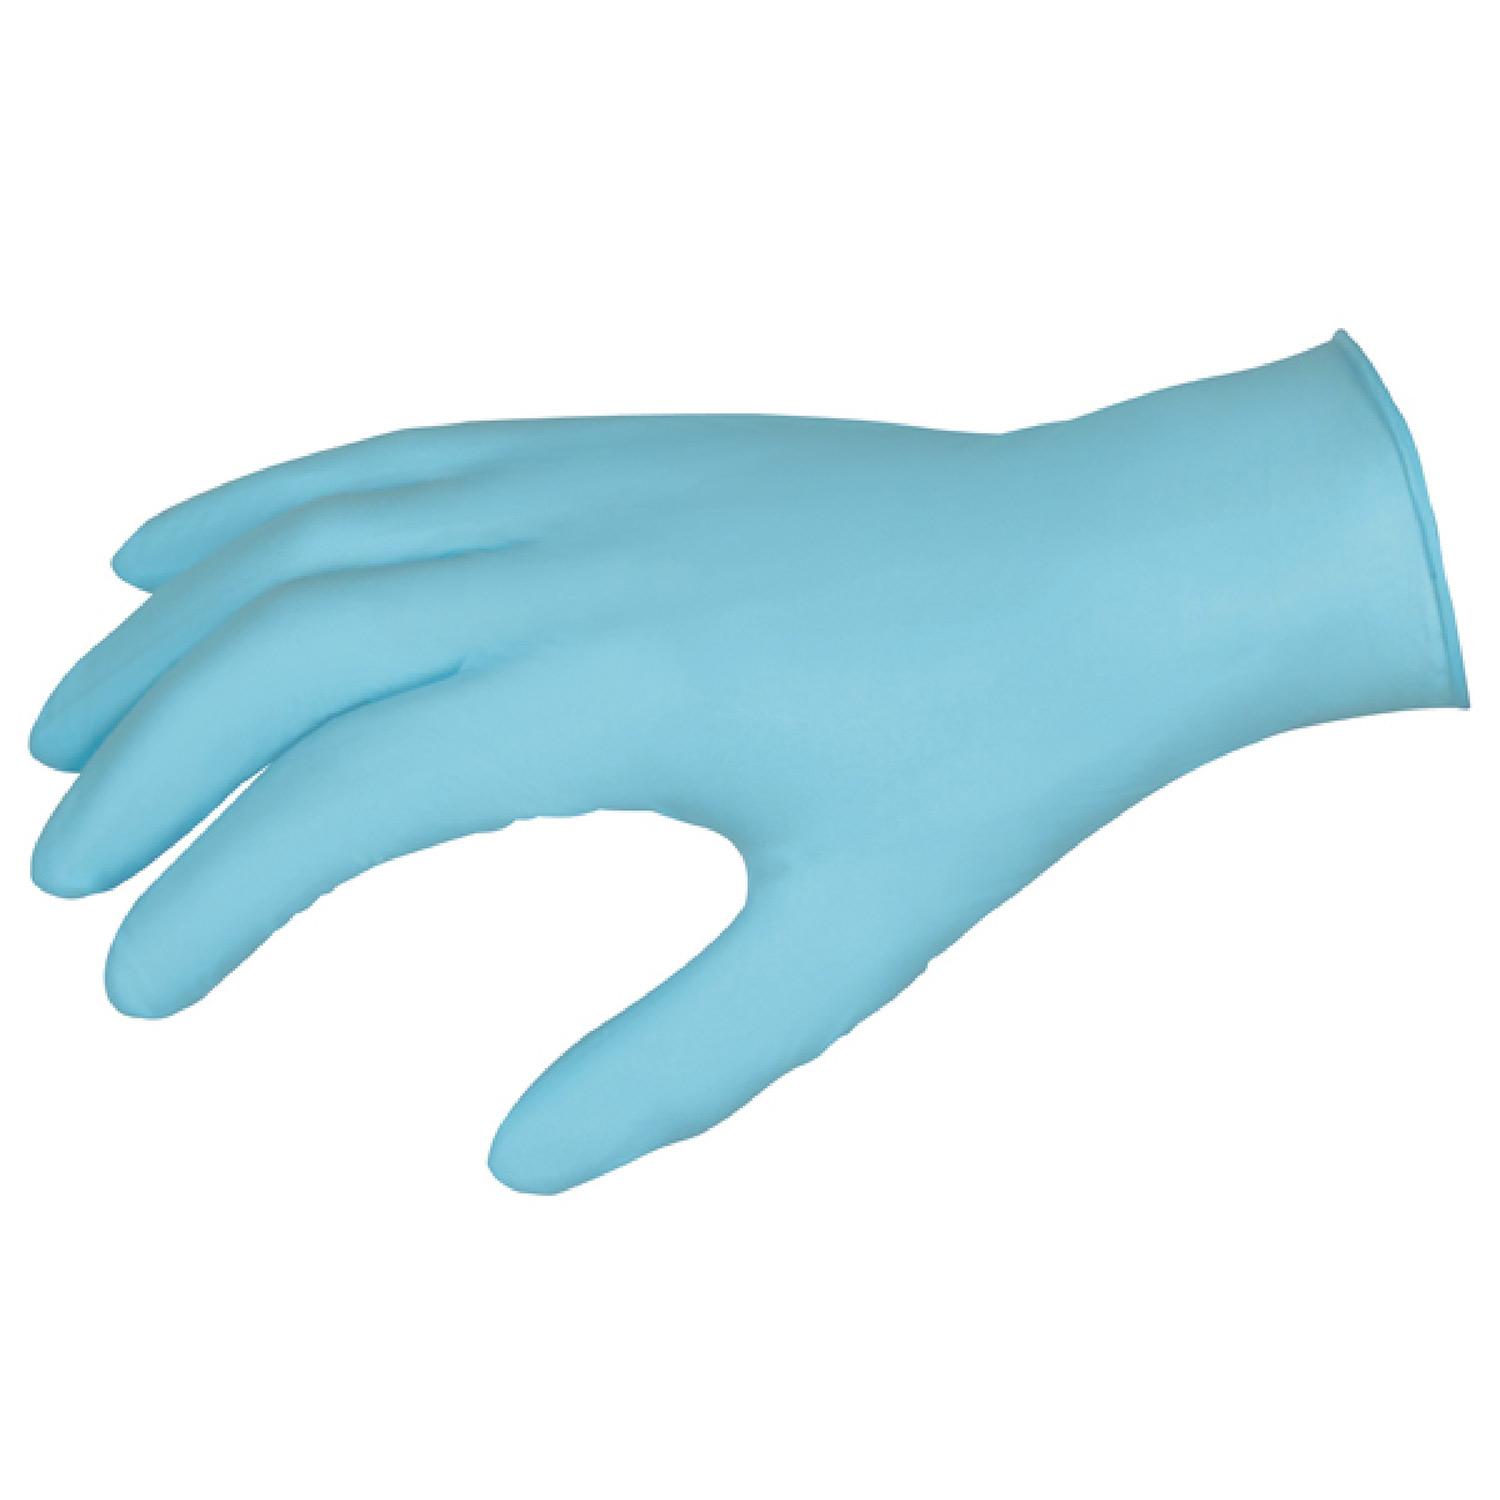 Boss Gloves 85 10 Count Disposable Latex Gloves 